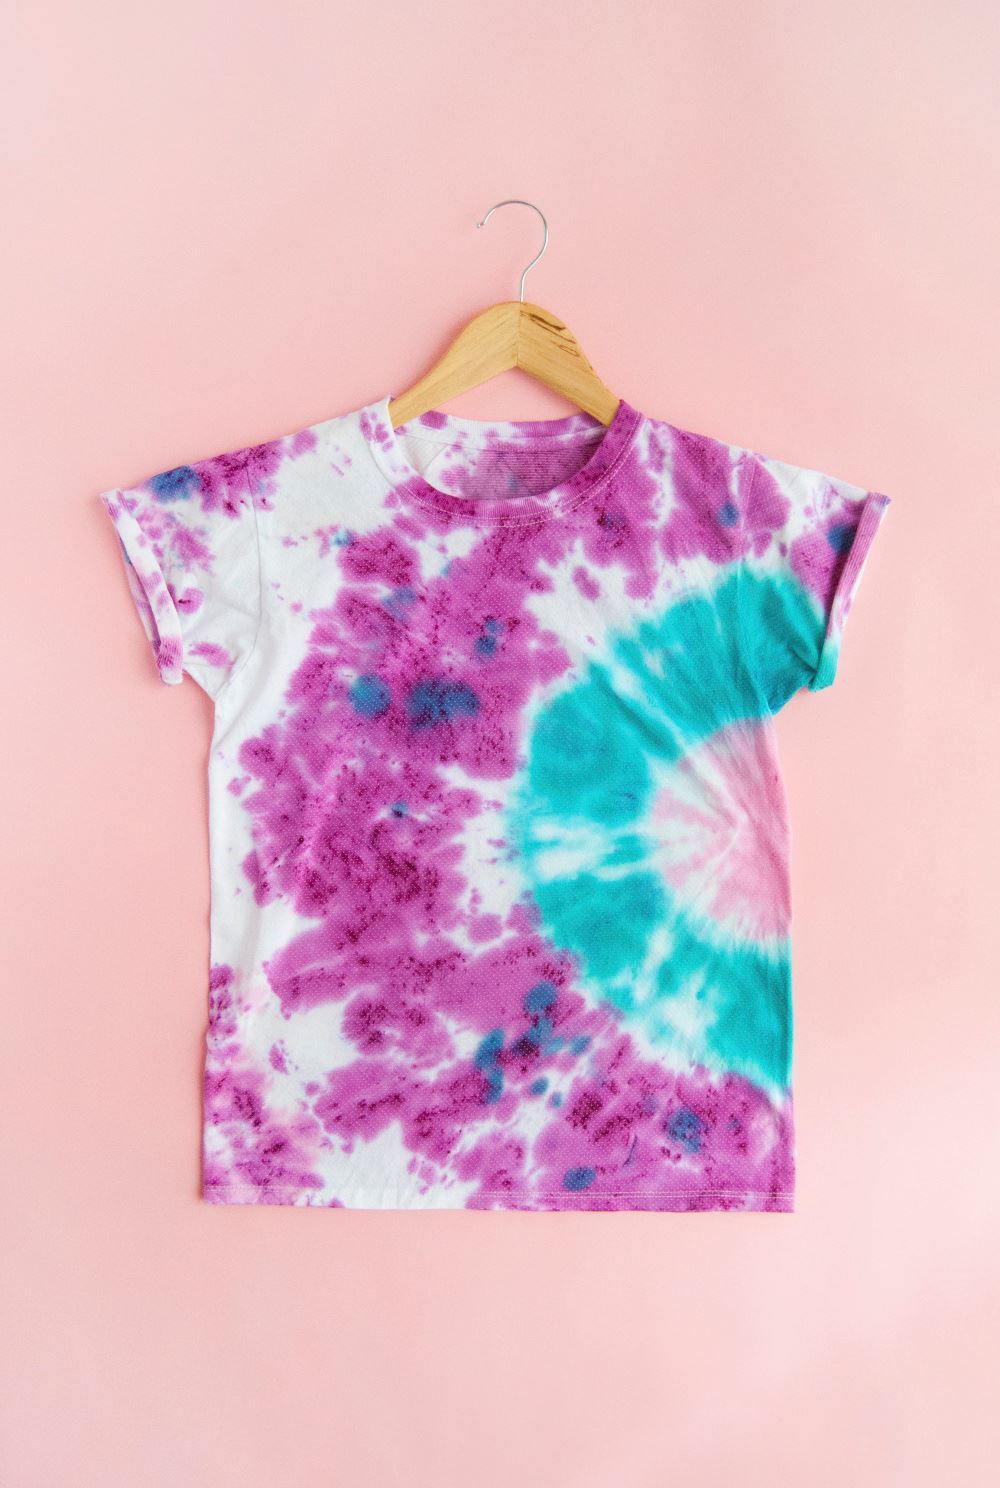 Candy-Inspired Two-Minute Tie Dye Shirts 